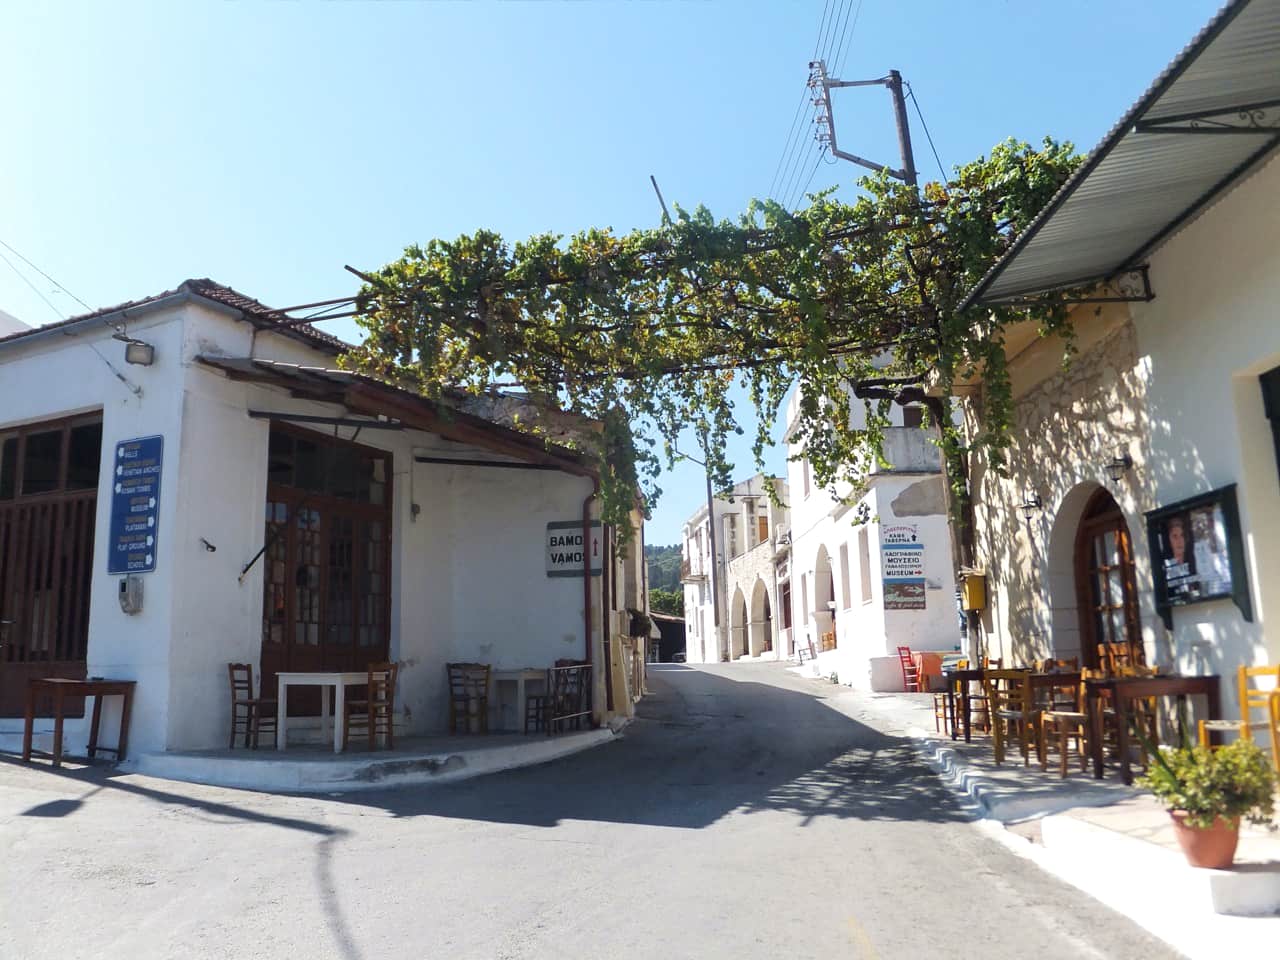 Traditional Villages Experience In Chania Crete, traditional villases private tour, traditional village excursion, cretan food, social tour chania crete, best private tour chania crete, activities chania crete, history culture tour chania, agrotourism ethnography chania crete